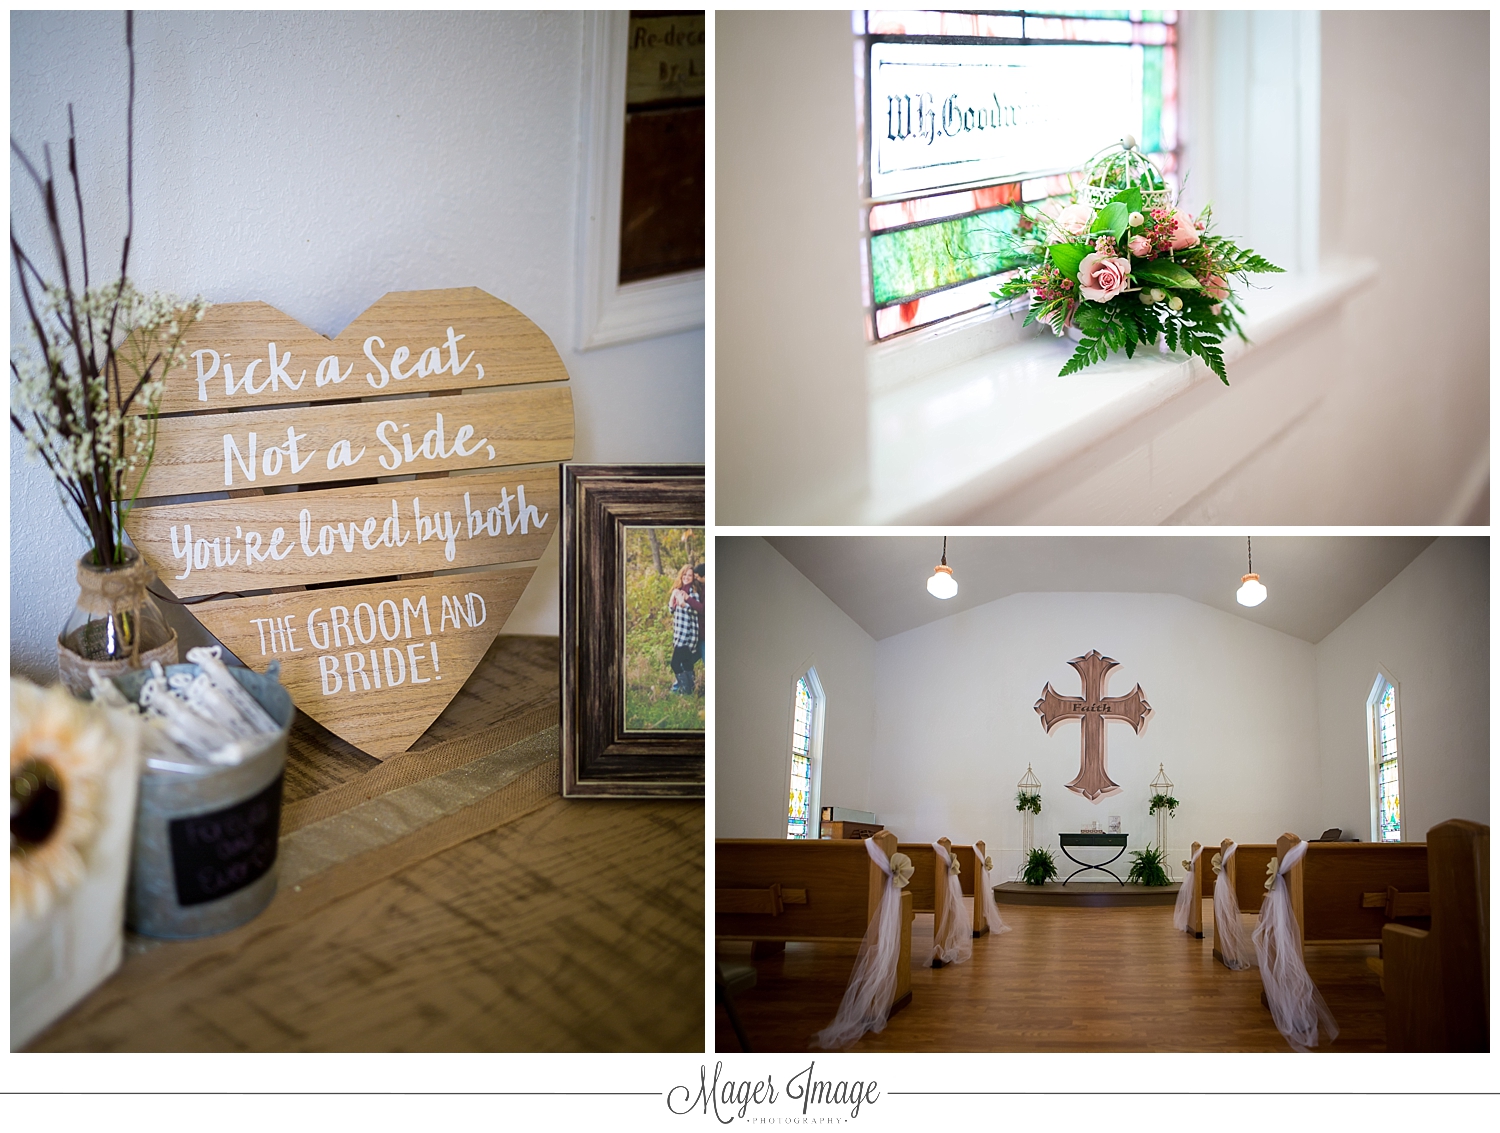 chapel window decorations wooden pick a seat not a side loved by both cross decorated pews